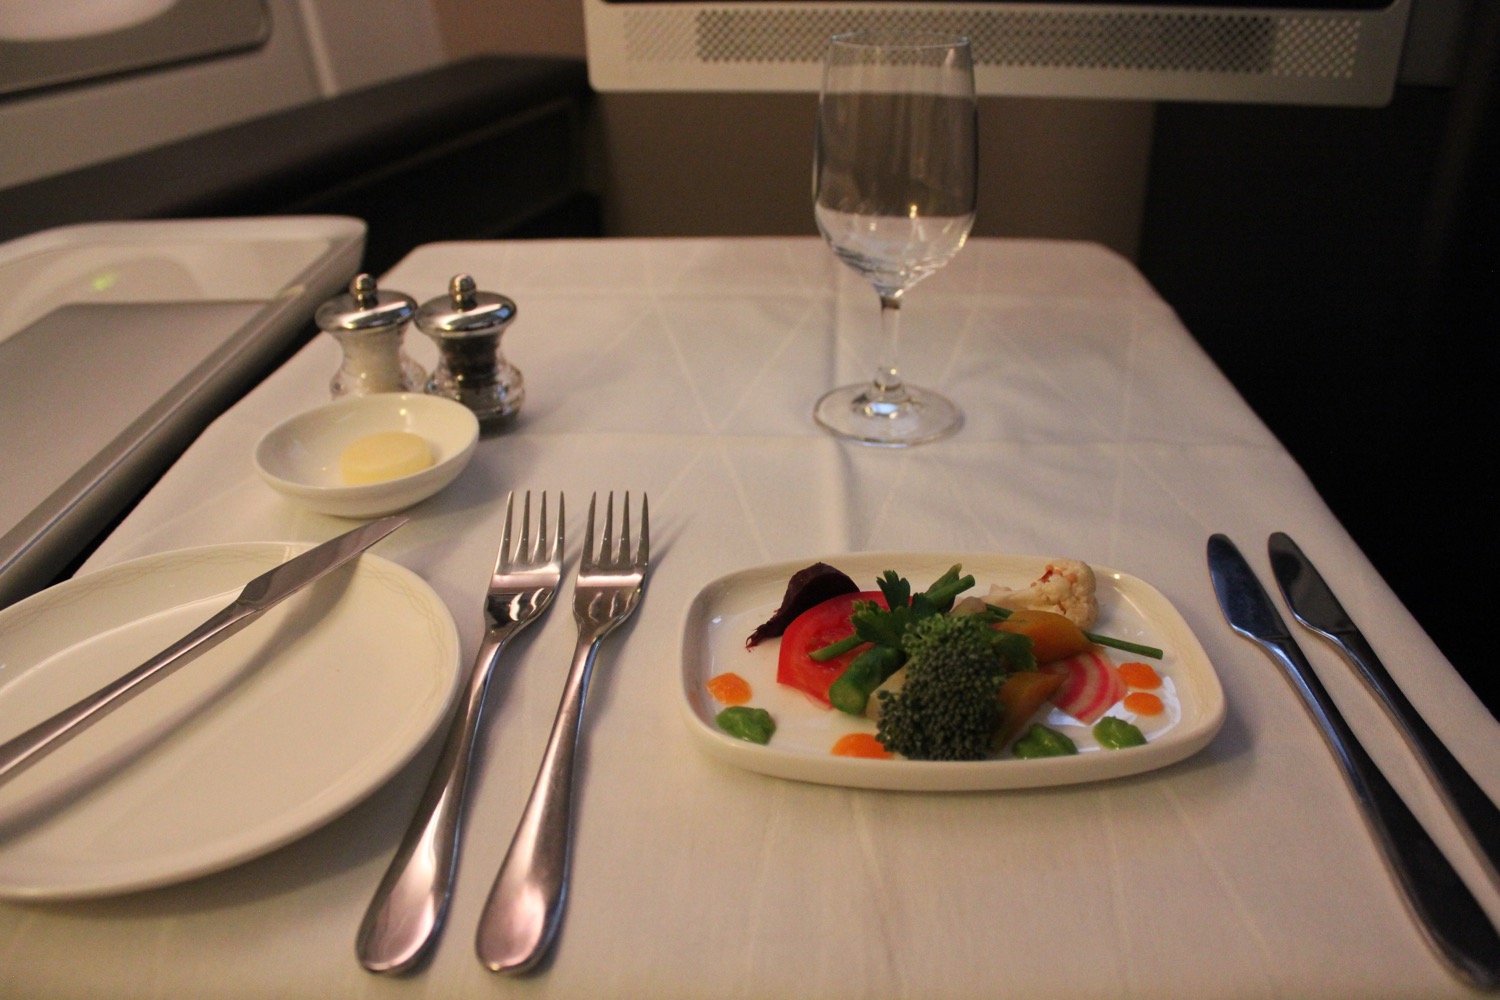 British Airways A380 First Class Review - 18